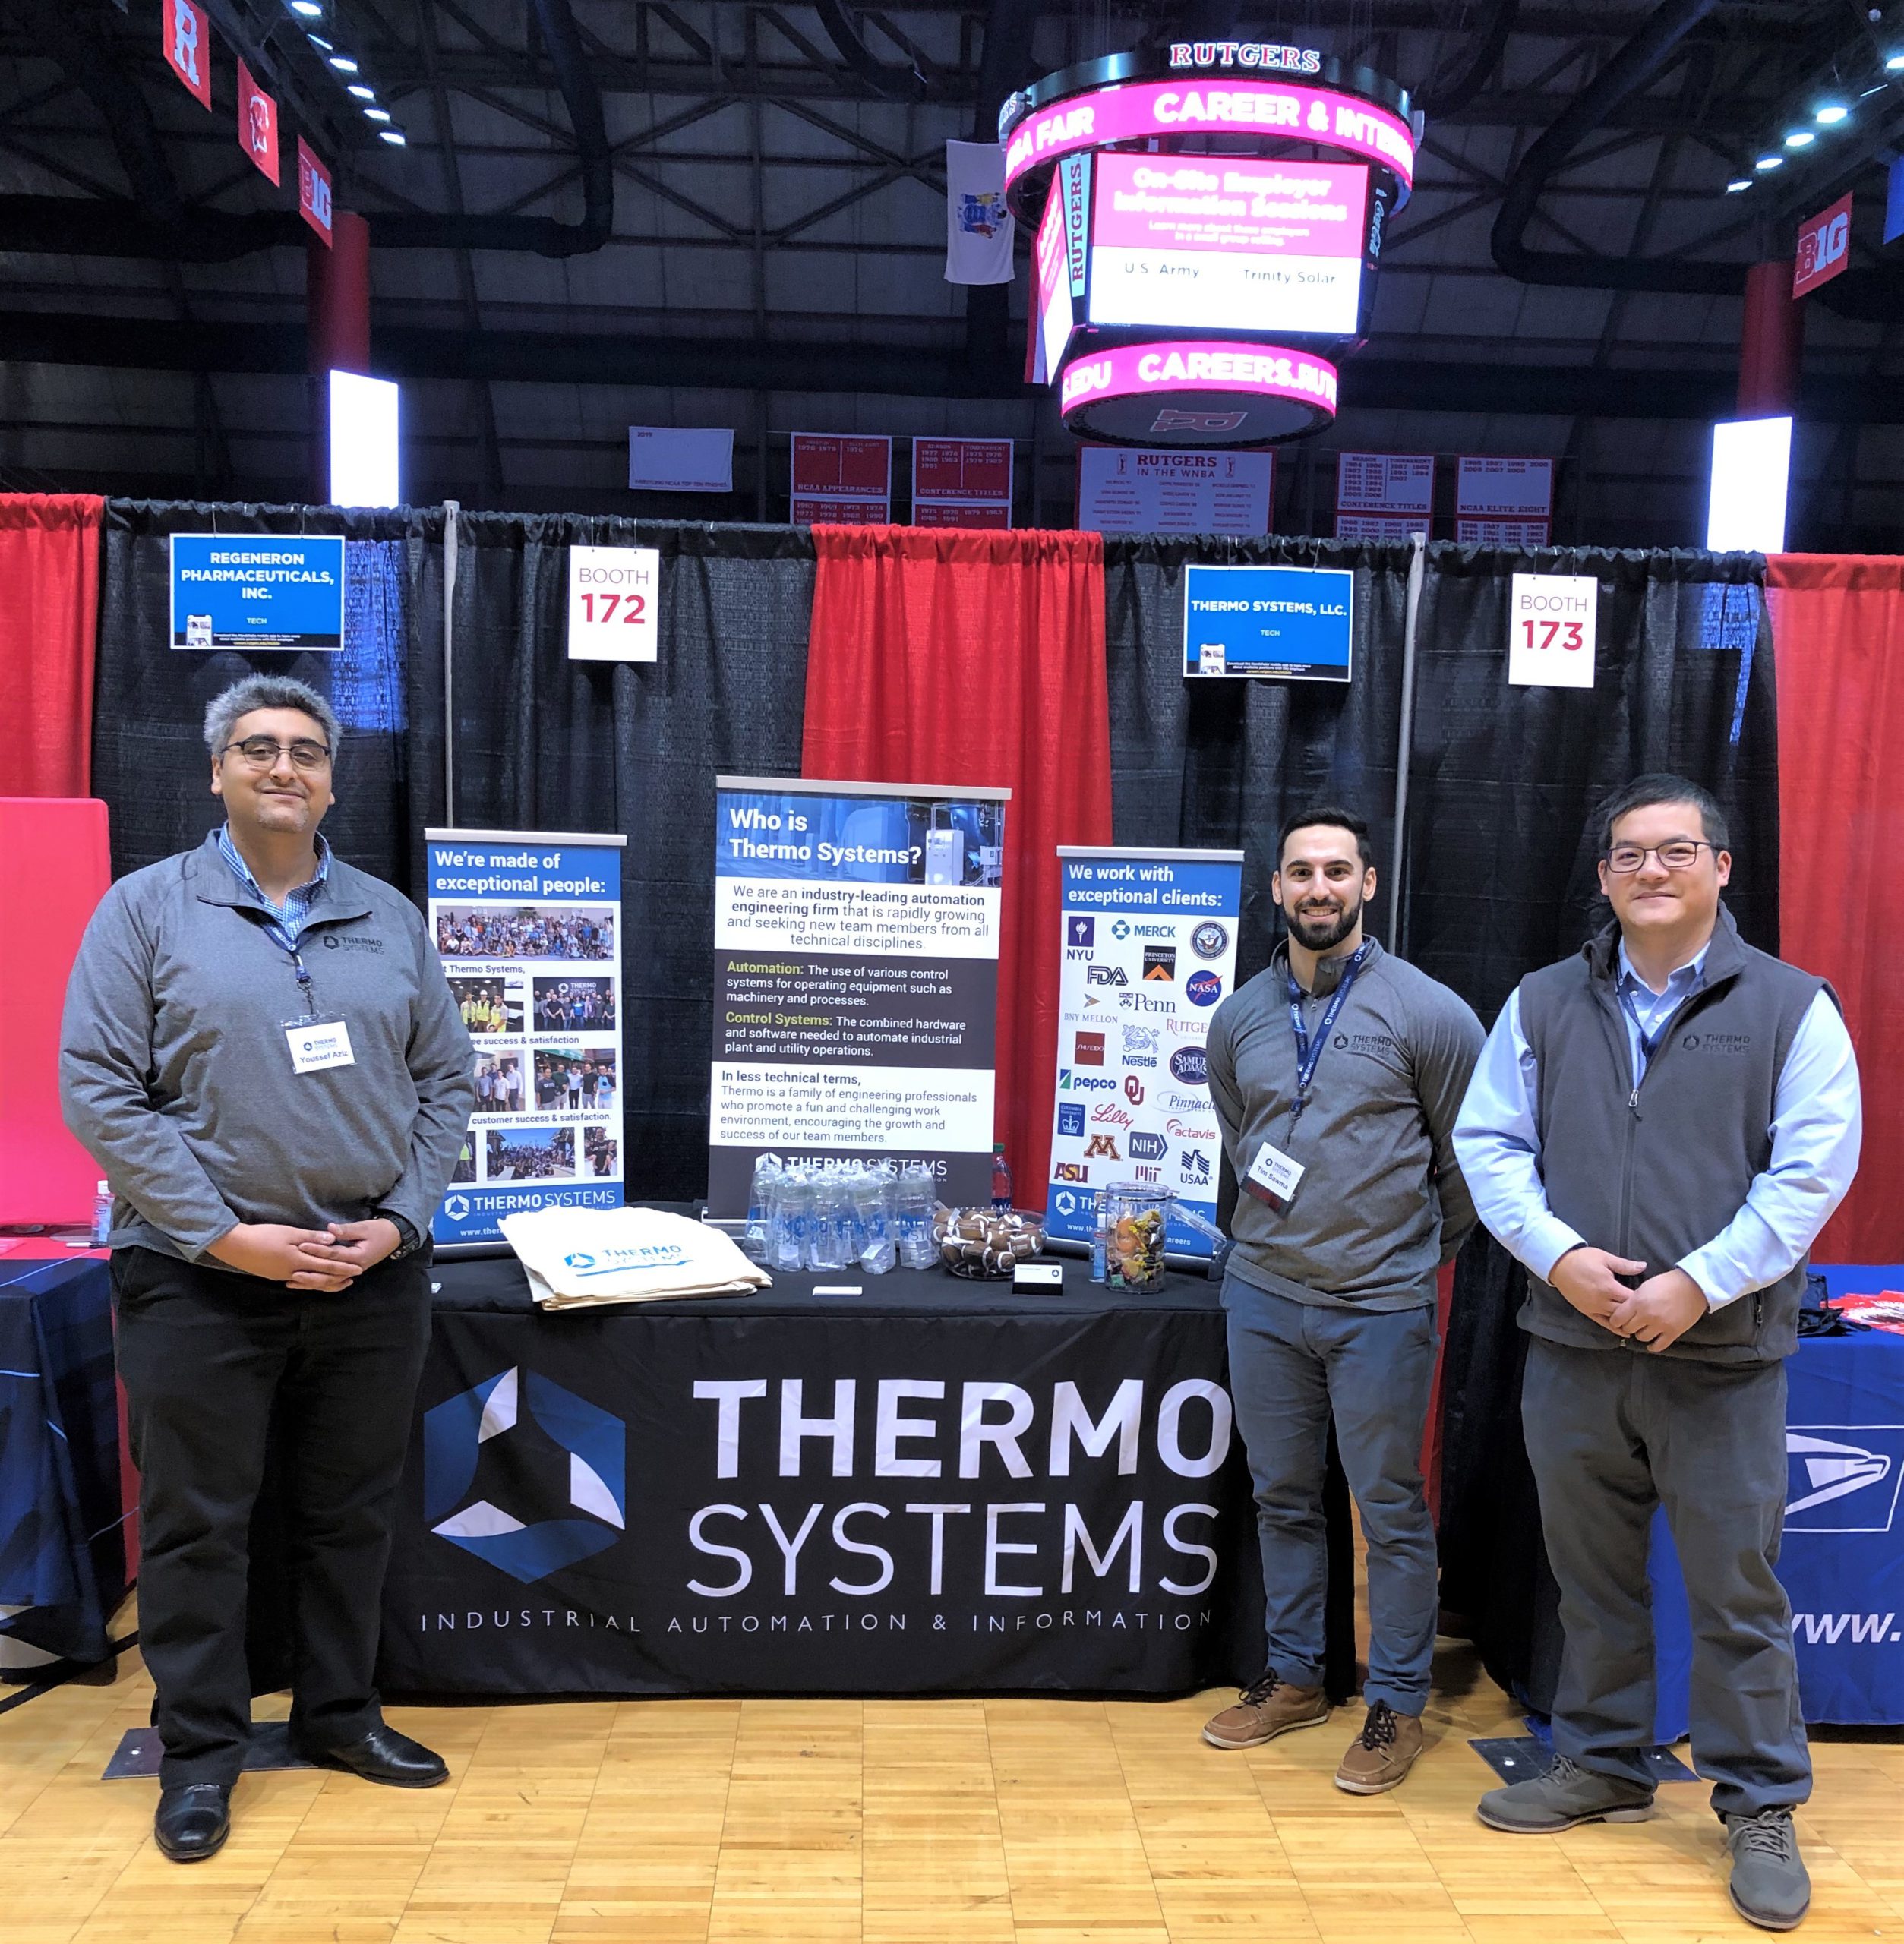 Thermo Begins the 2020 Career Fair Tour